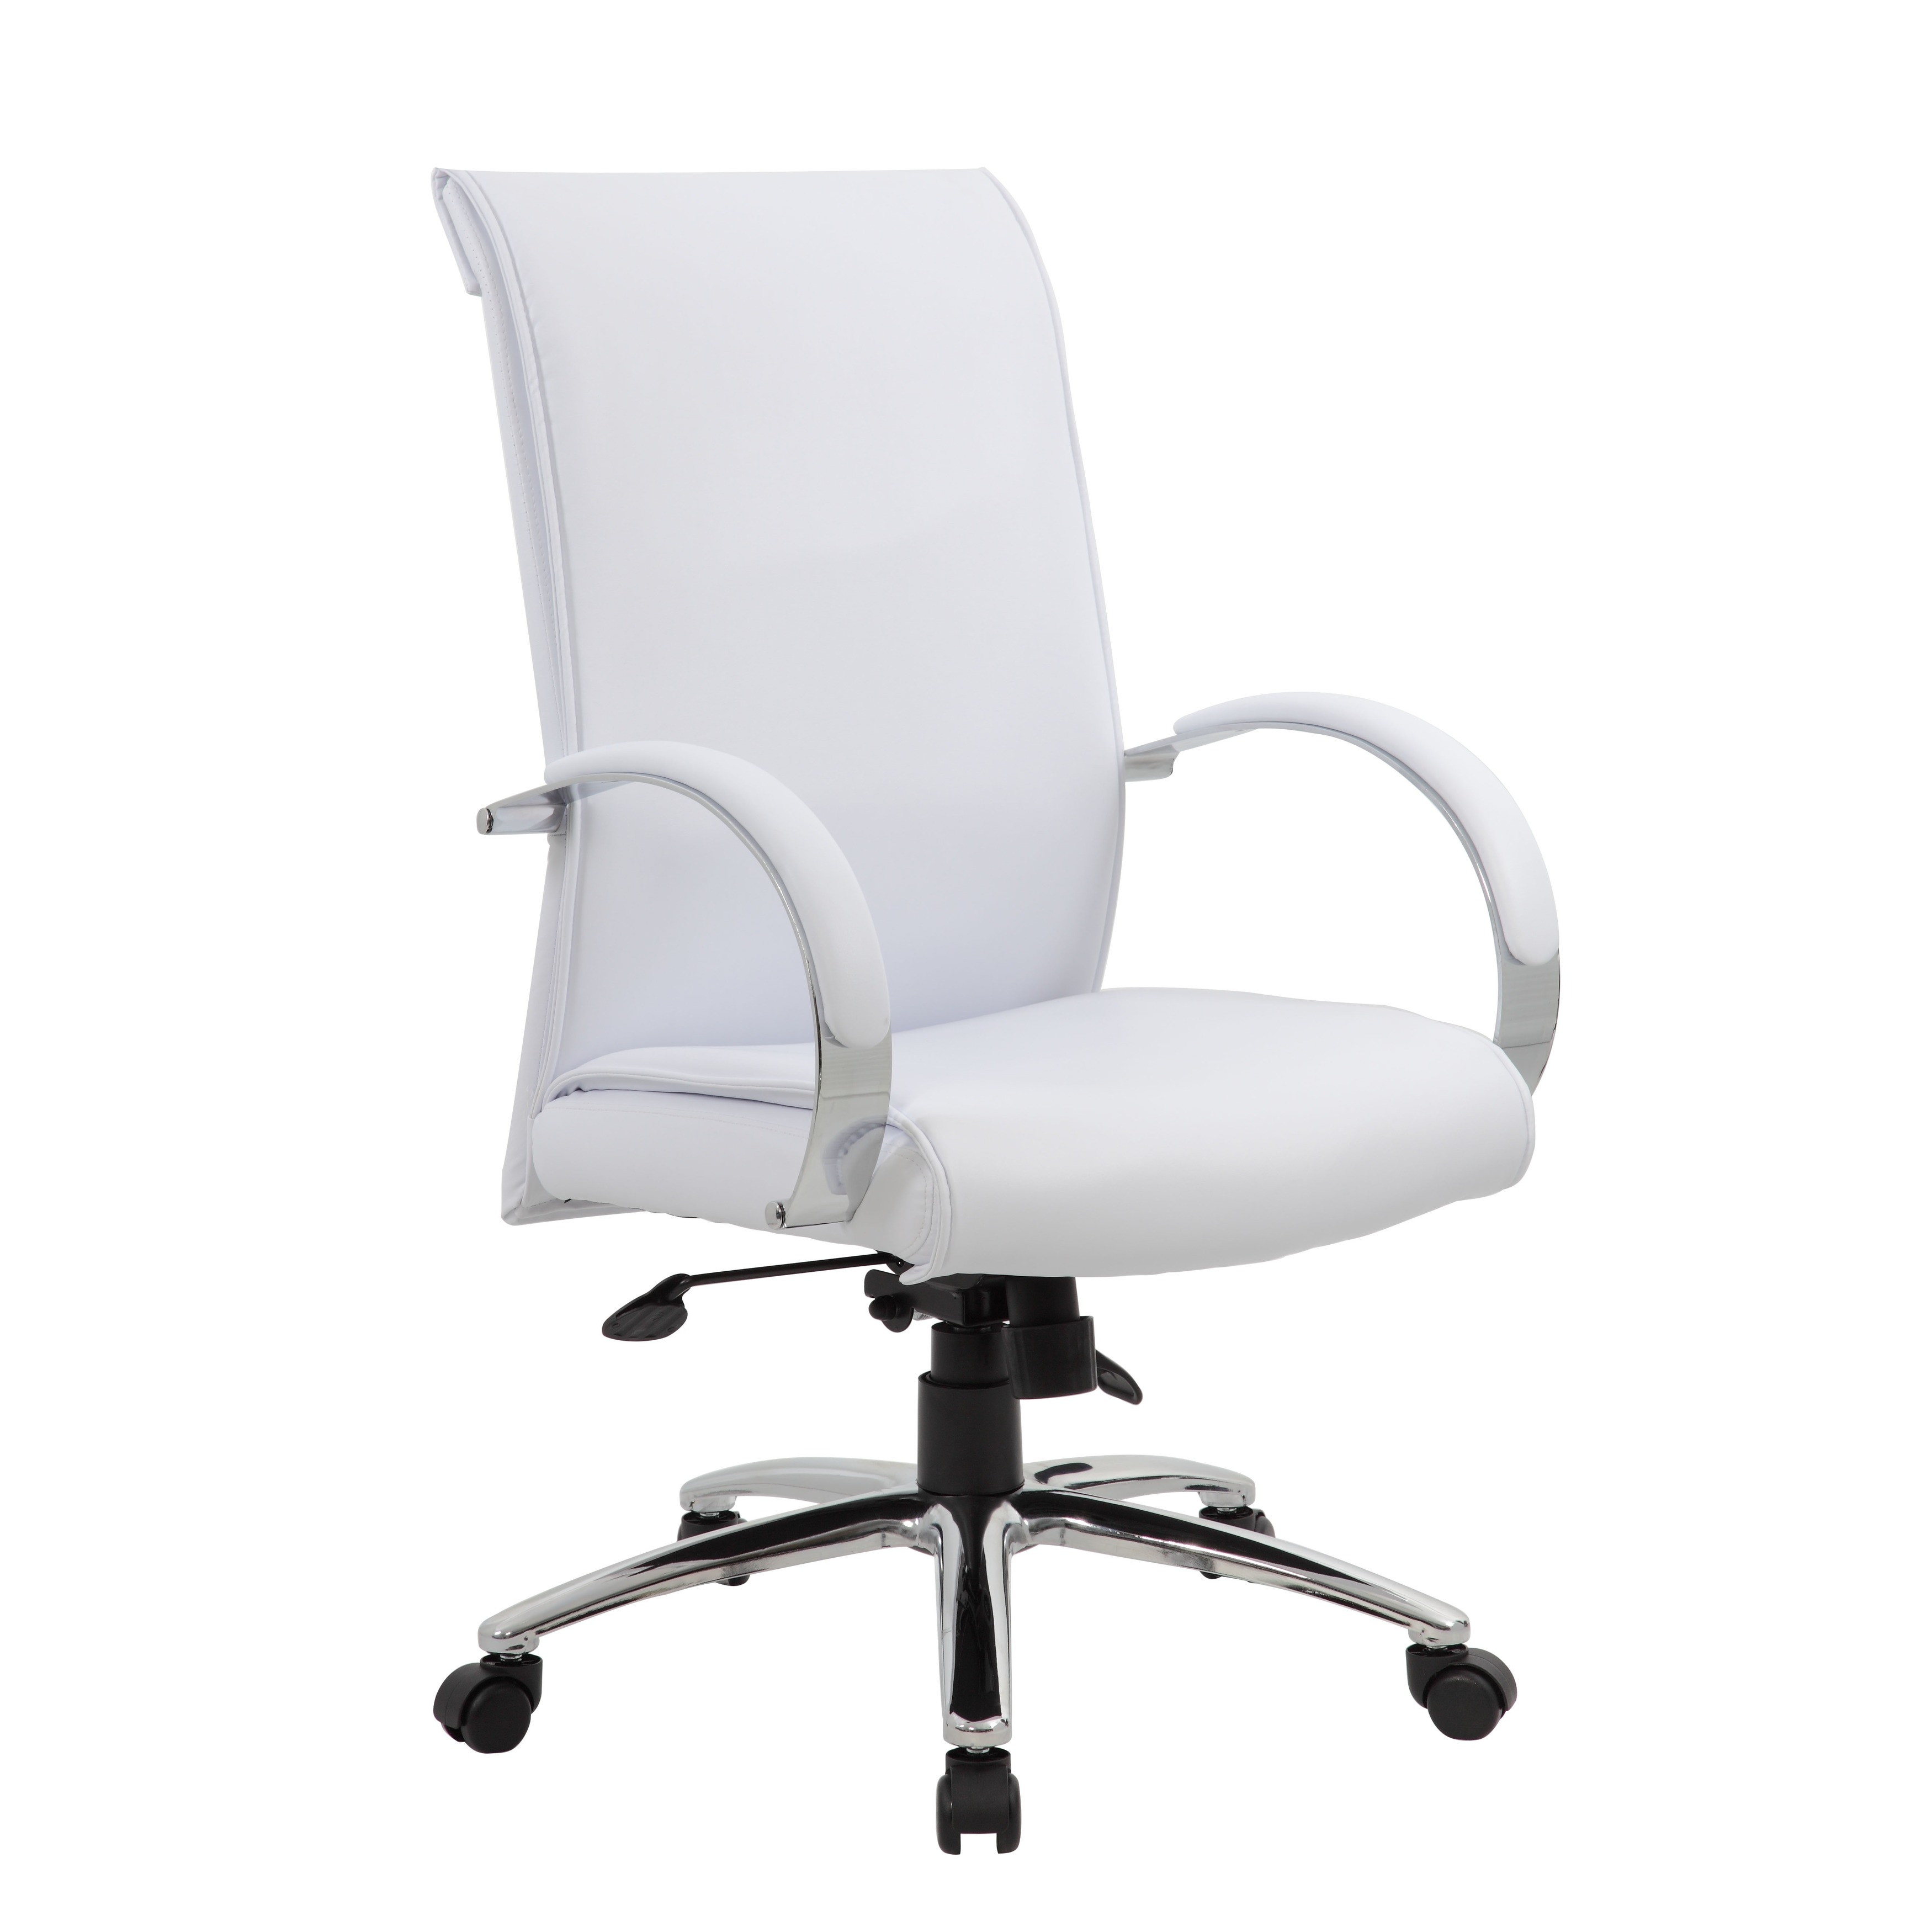 Boss Caresoft Plus Executive Chair (White or Black NOTE WHITE MAY BE CONSIDERED OFF WHITE OR CREAM. NOT A TRUE WHITE.Chrome finished 27 inch base and padded arm restsUpholstered in White Caresoft PlusPneumatic gas lift seat height adjustmentHooded double